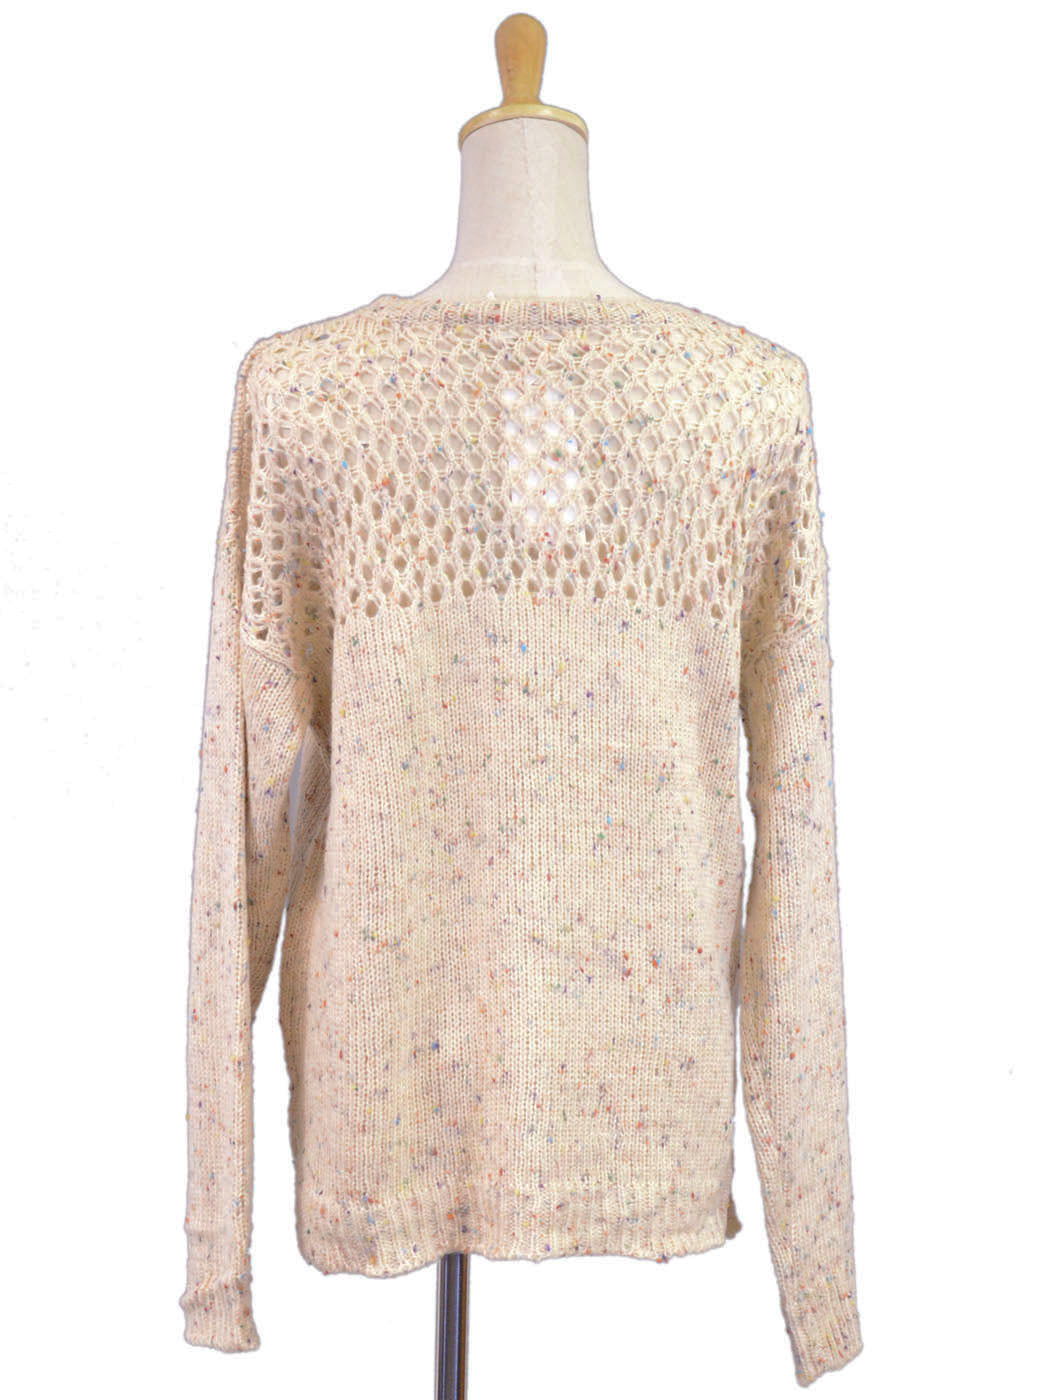 Lush Oversized Long Sleeved Speckled Knit Jumper With Loose Knit Neckline - ALILANG.COM